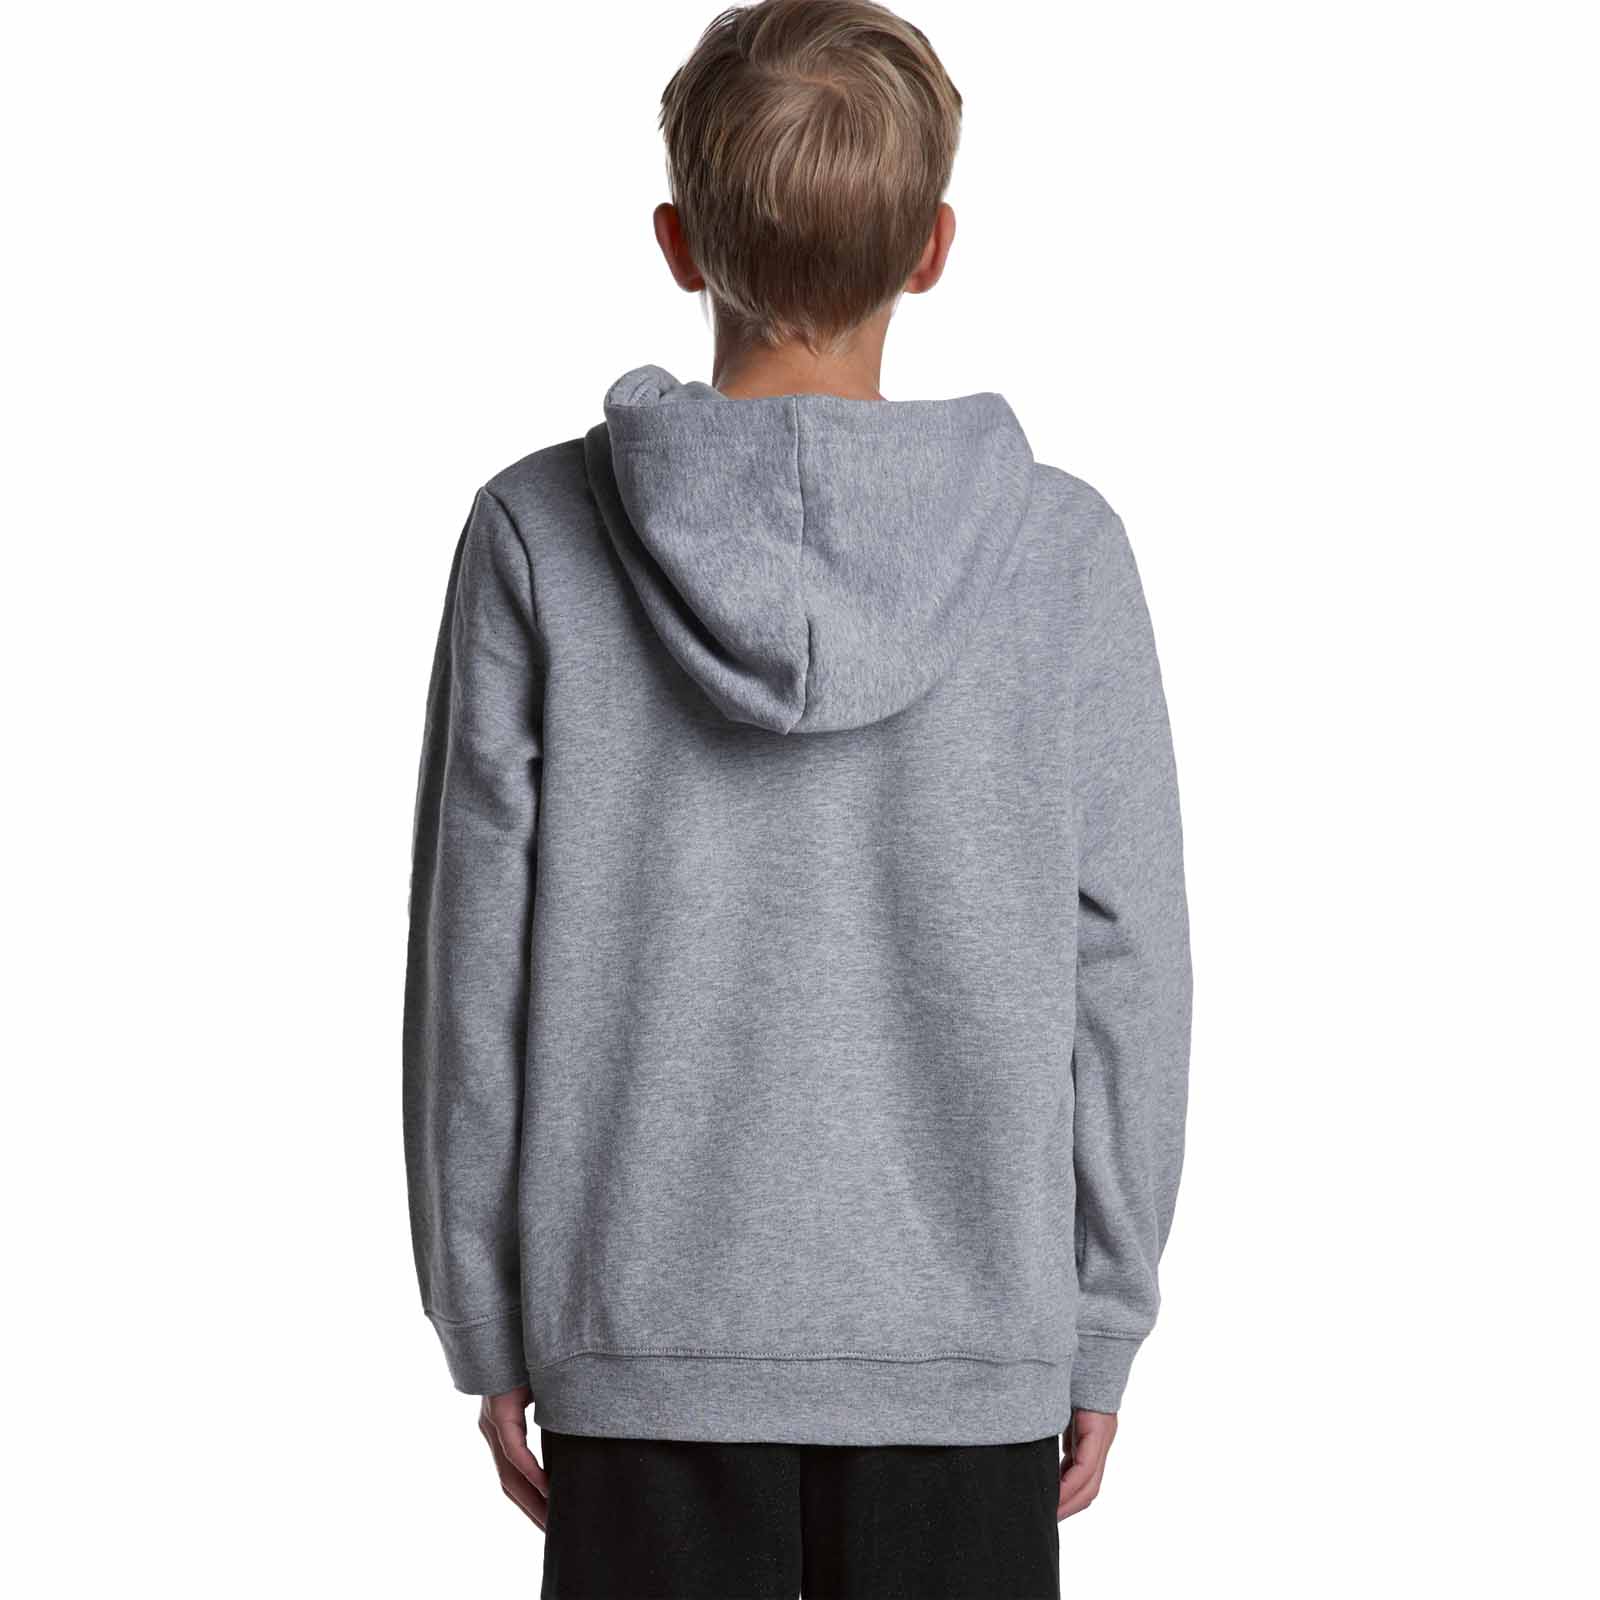 AS Colour Youth Supply Hoodie back view in colour Grey Marle